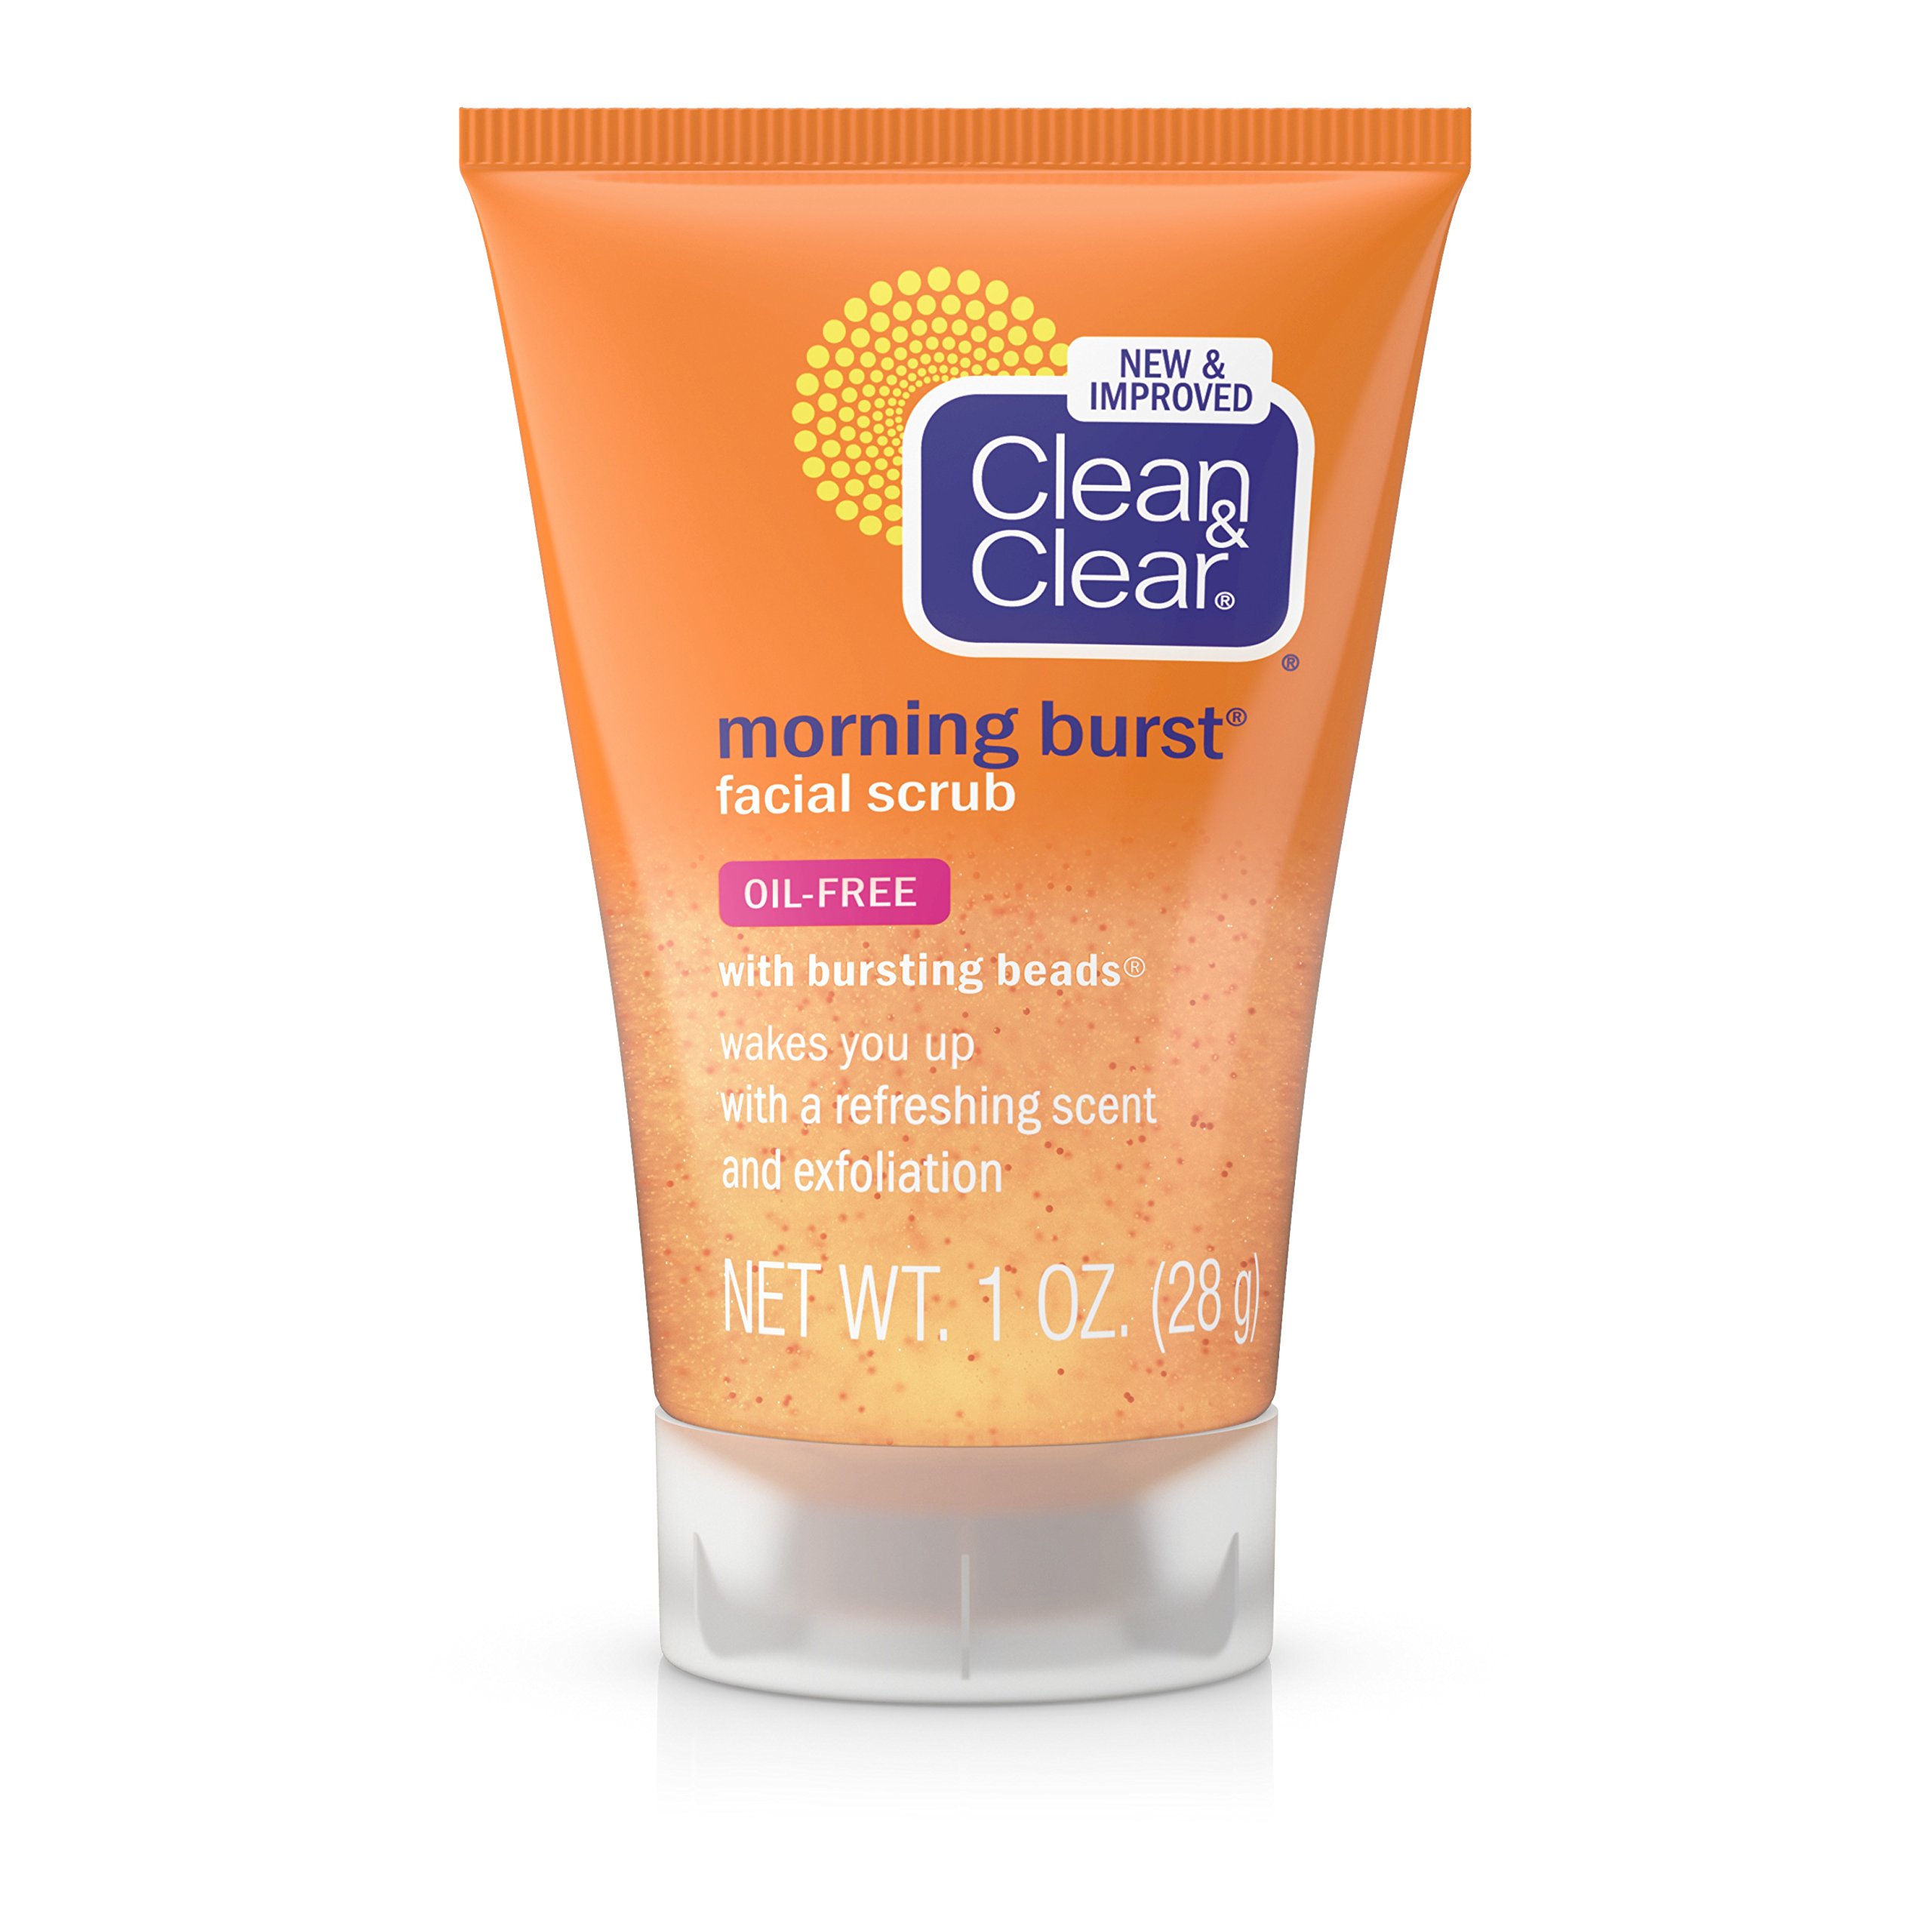 Clean & Clear Morning Burst Facial Cleanser for Daily Skincare Routines, 1 Fluid Ounce